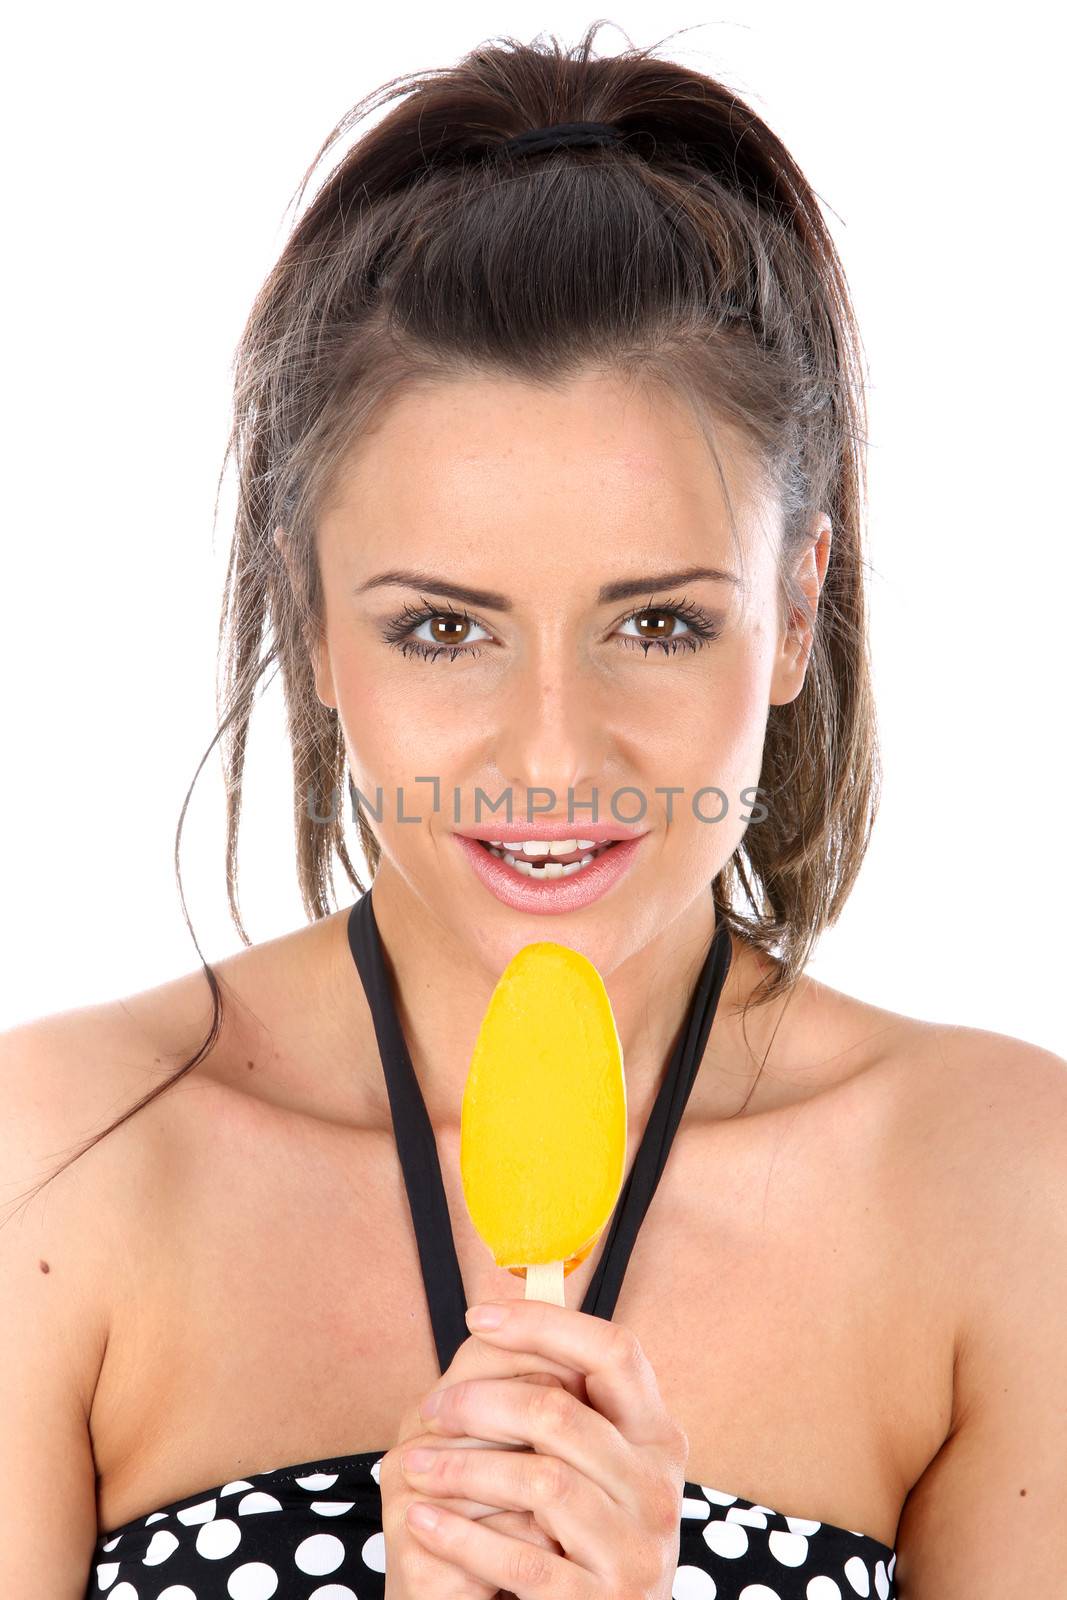 odel Released. Woman Eating Ice lolly by Whiteboxmedia